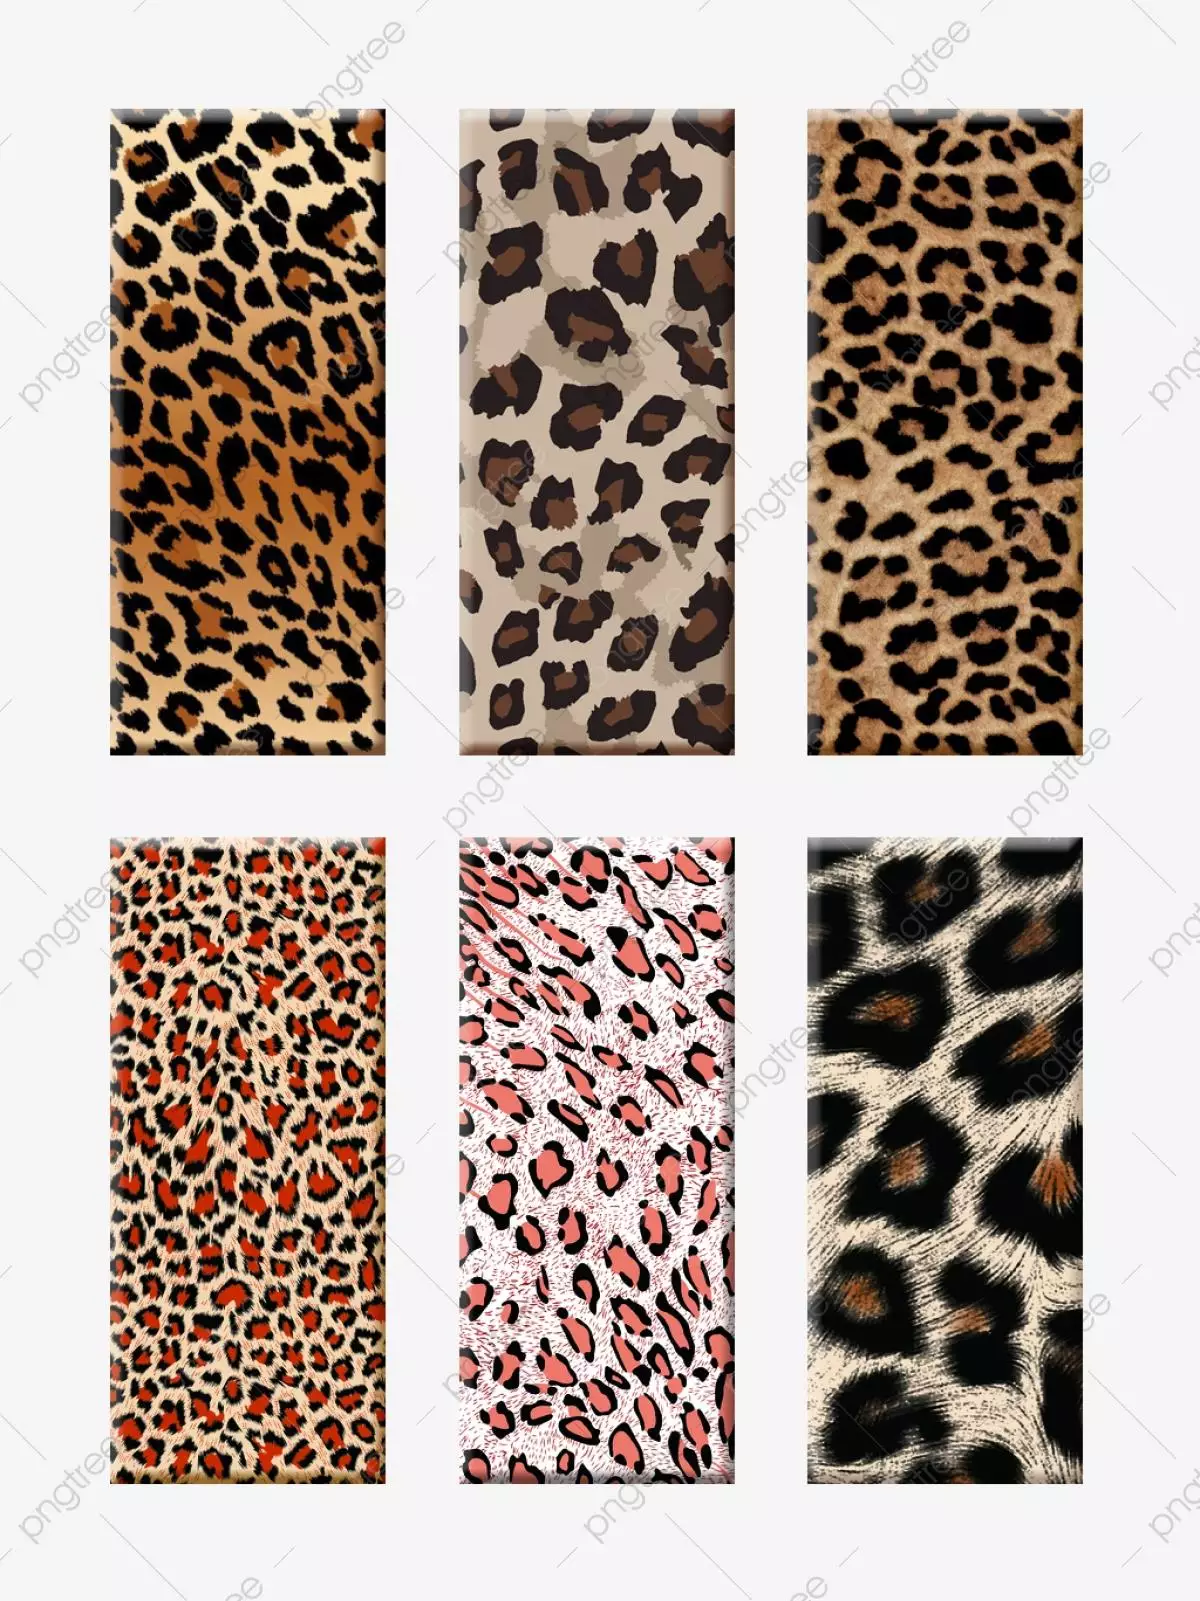 Leopard Texture Picture Material Leopard Leopard Animal Template Download on Pngtree